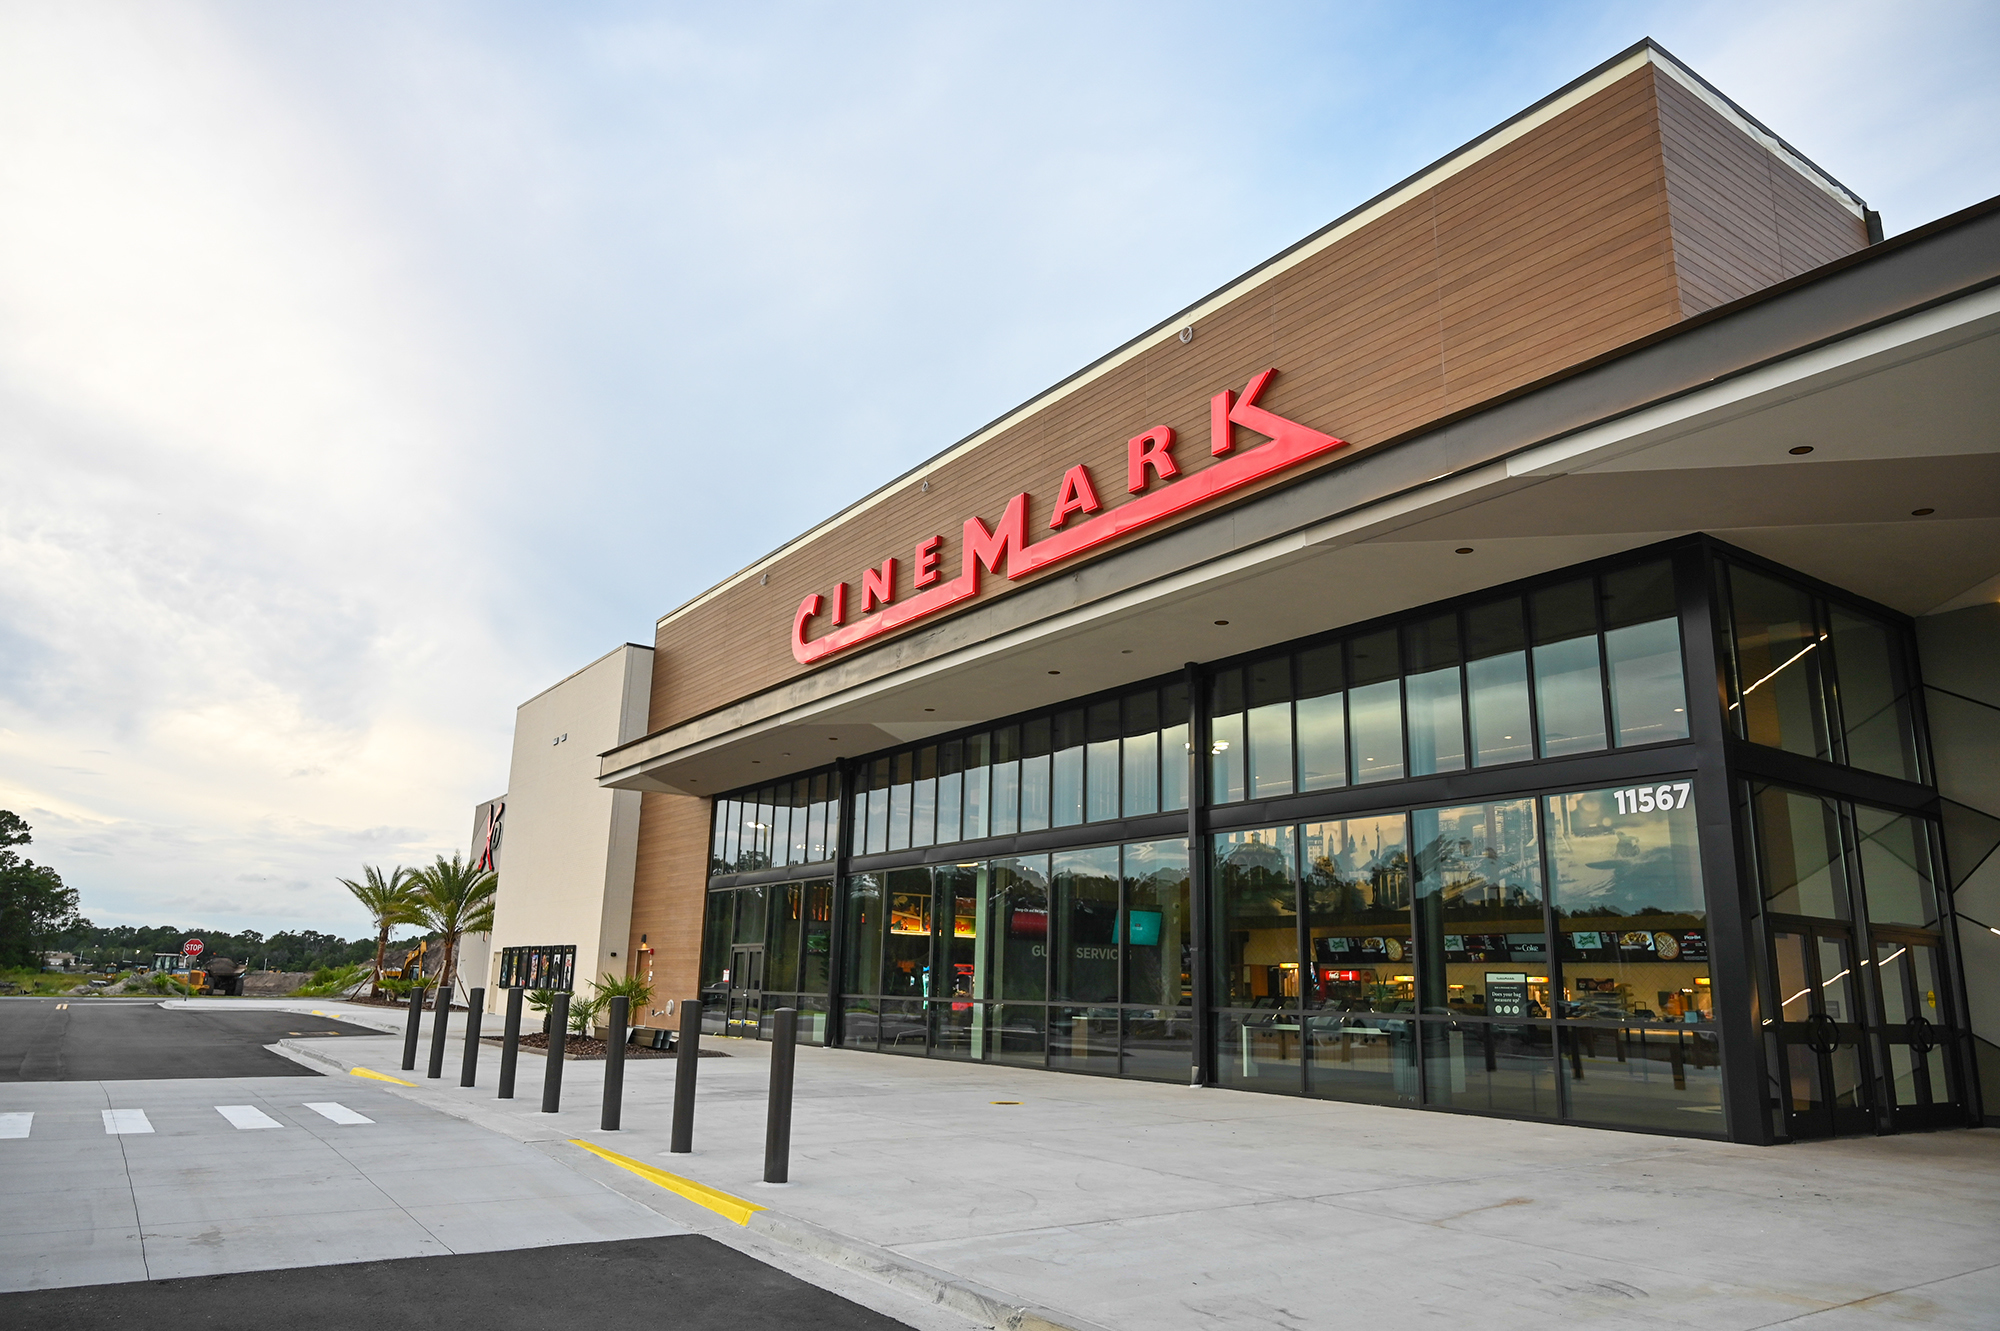 Cinemark Jacksonville Atlantic North and XD at 11567 Atlantic Blvd. seats 1,376 among its auditoriums and employs 120 people.